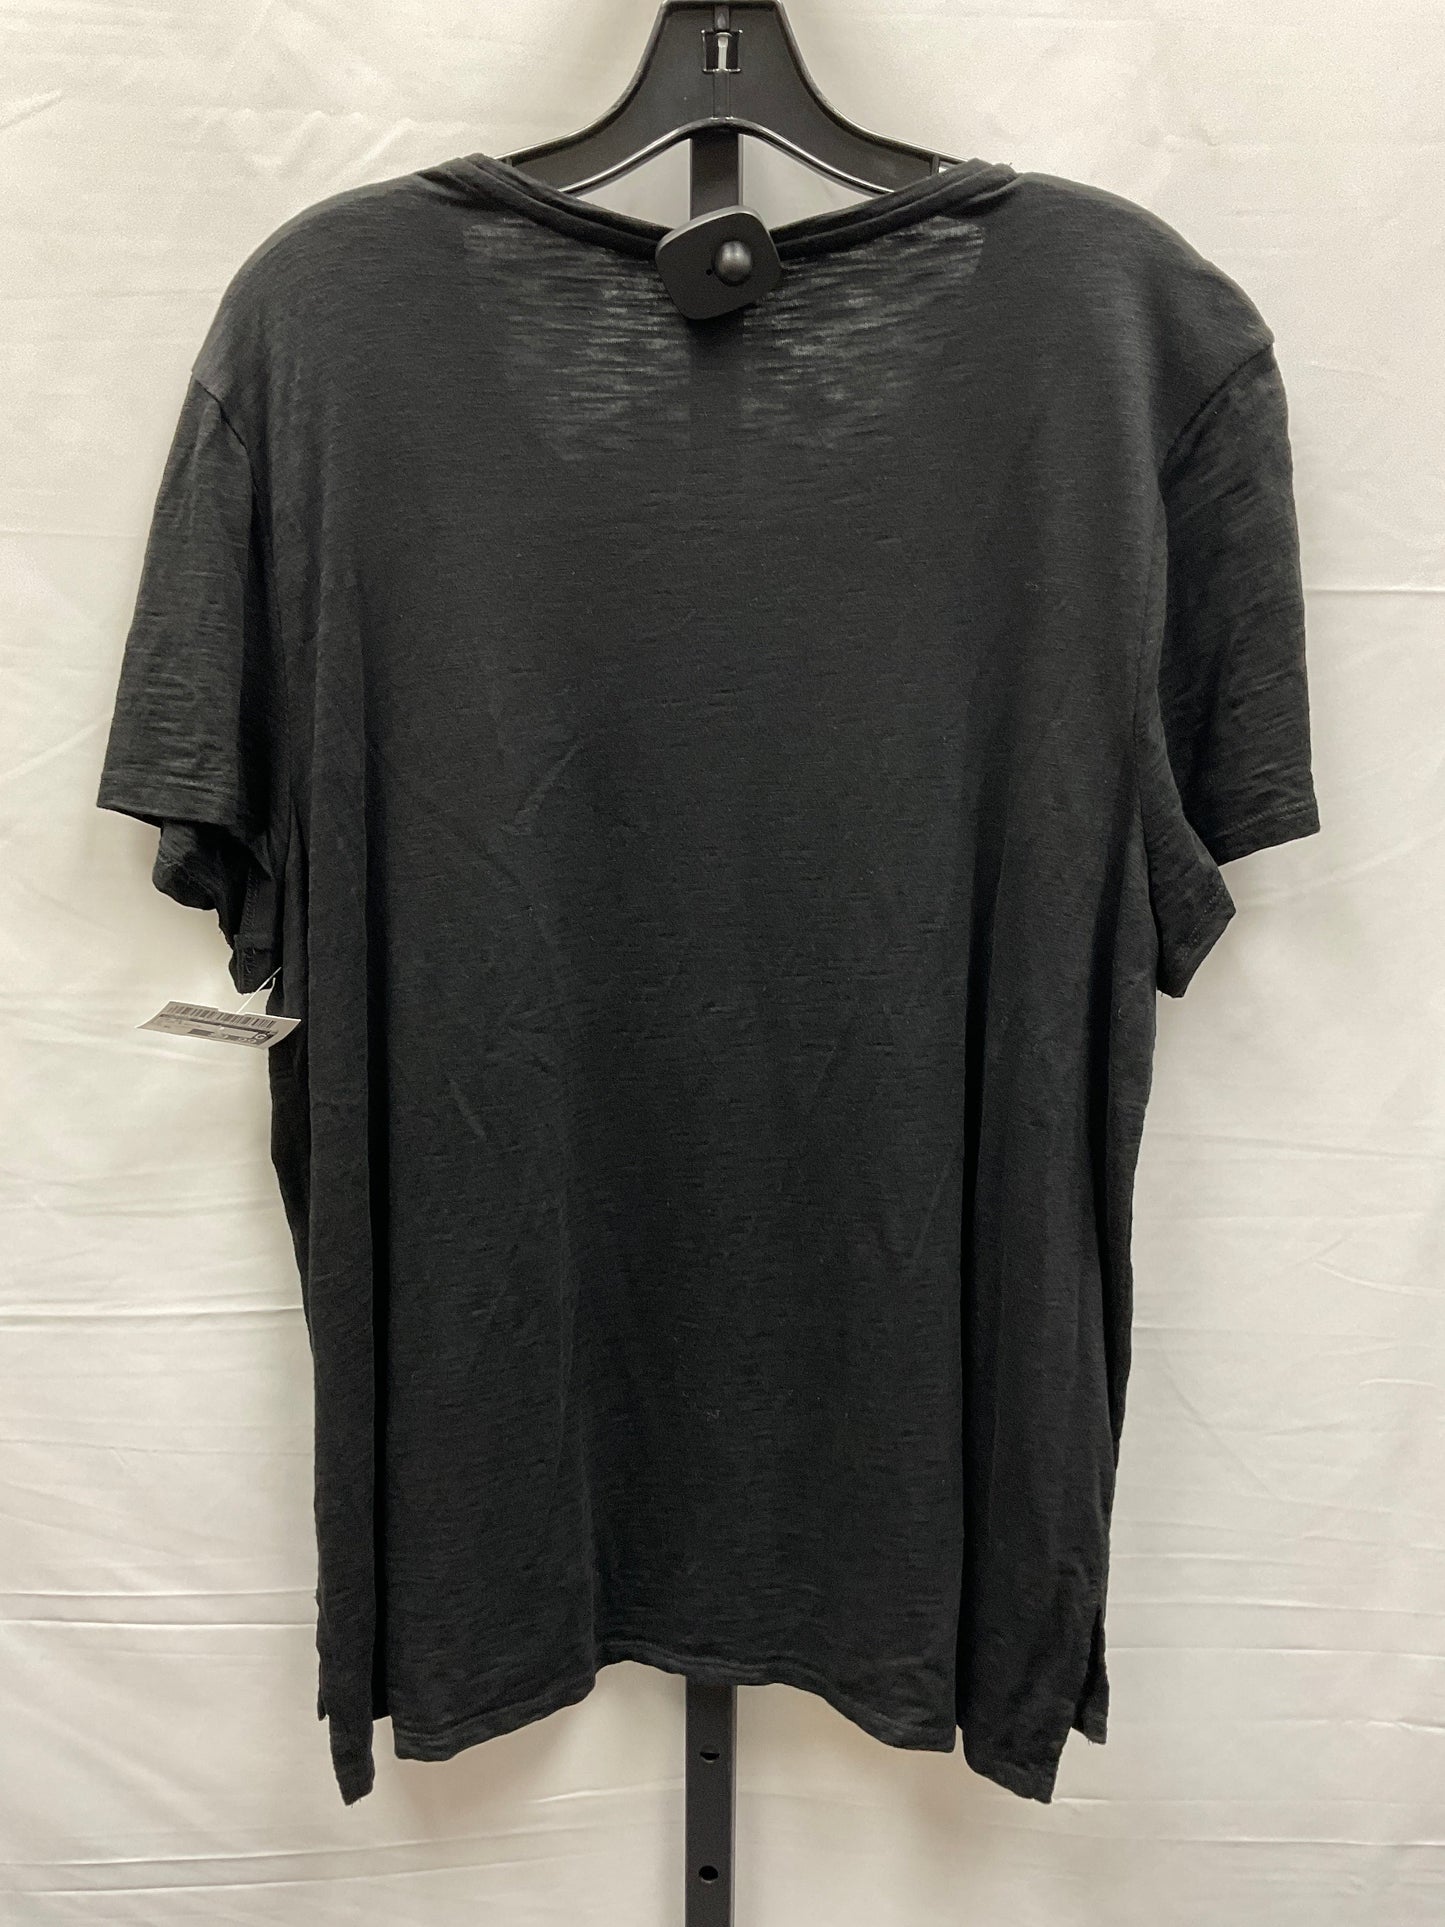 Black & White Top Short Sleeve Chicos, Size Xl